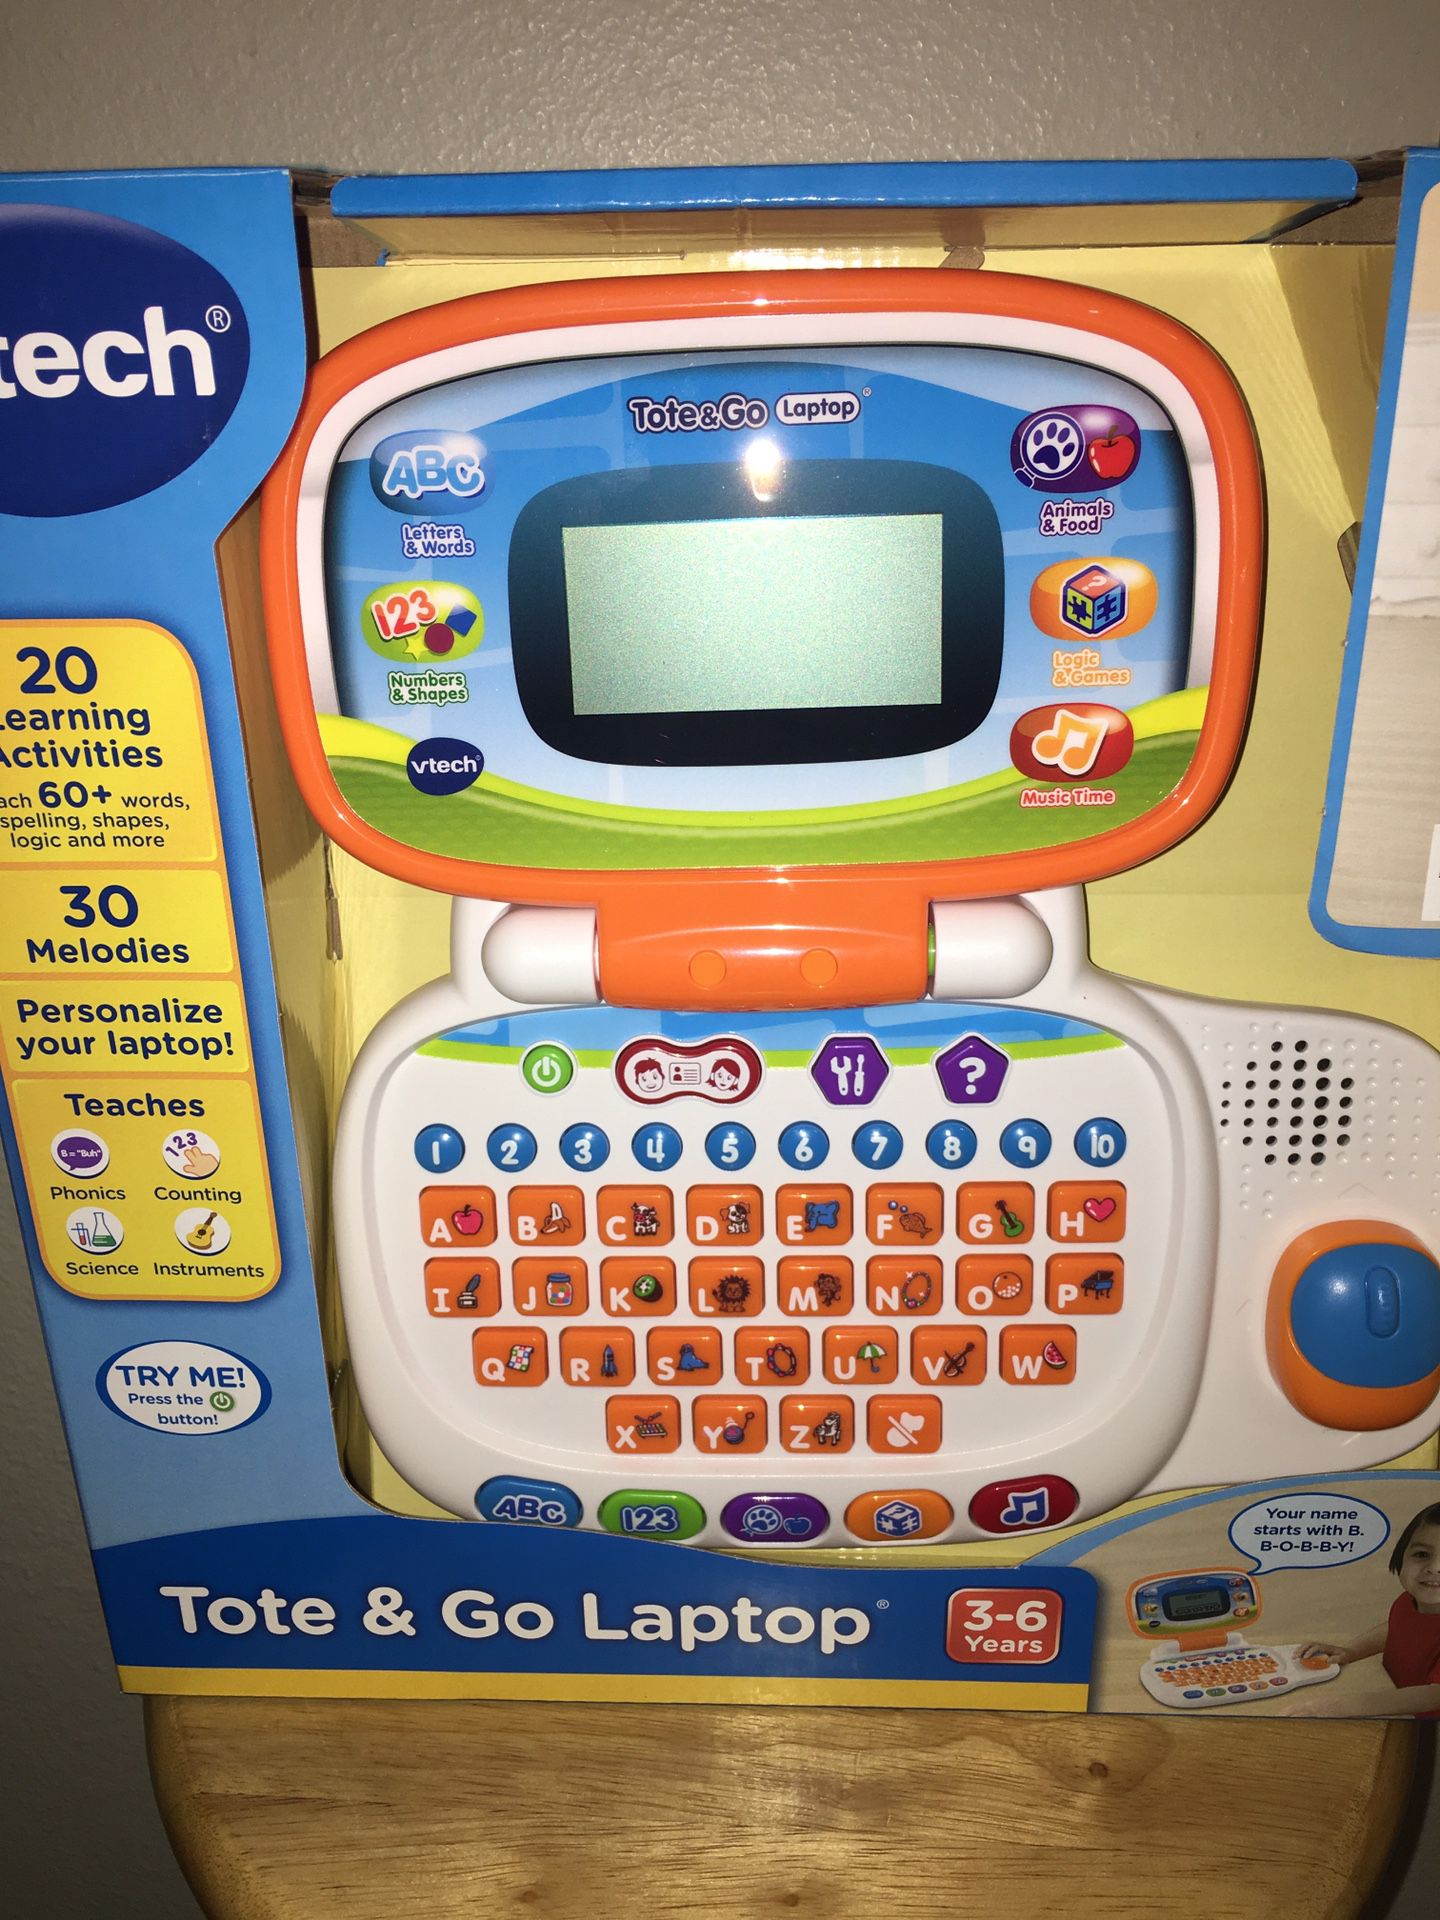 VTech Tote & Go Laptop Brand New for Sale in Tacoma, WA - OfferUp